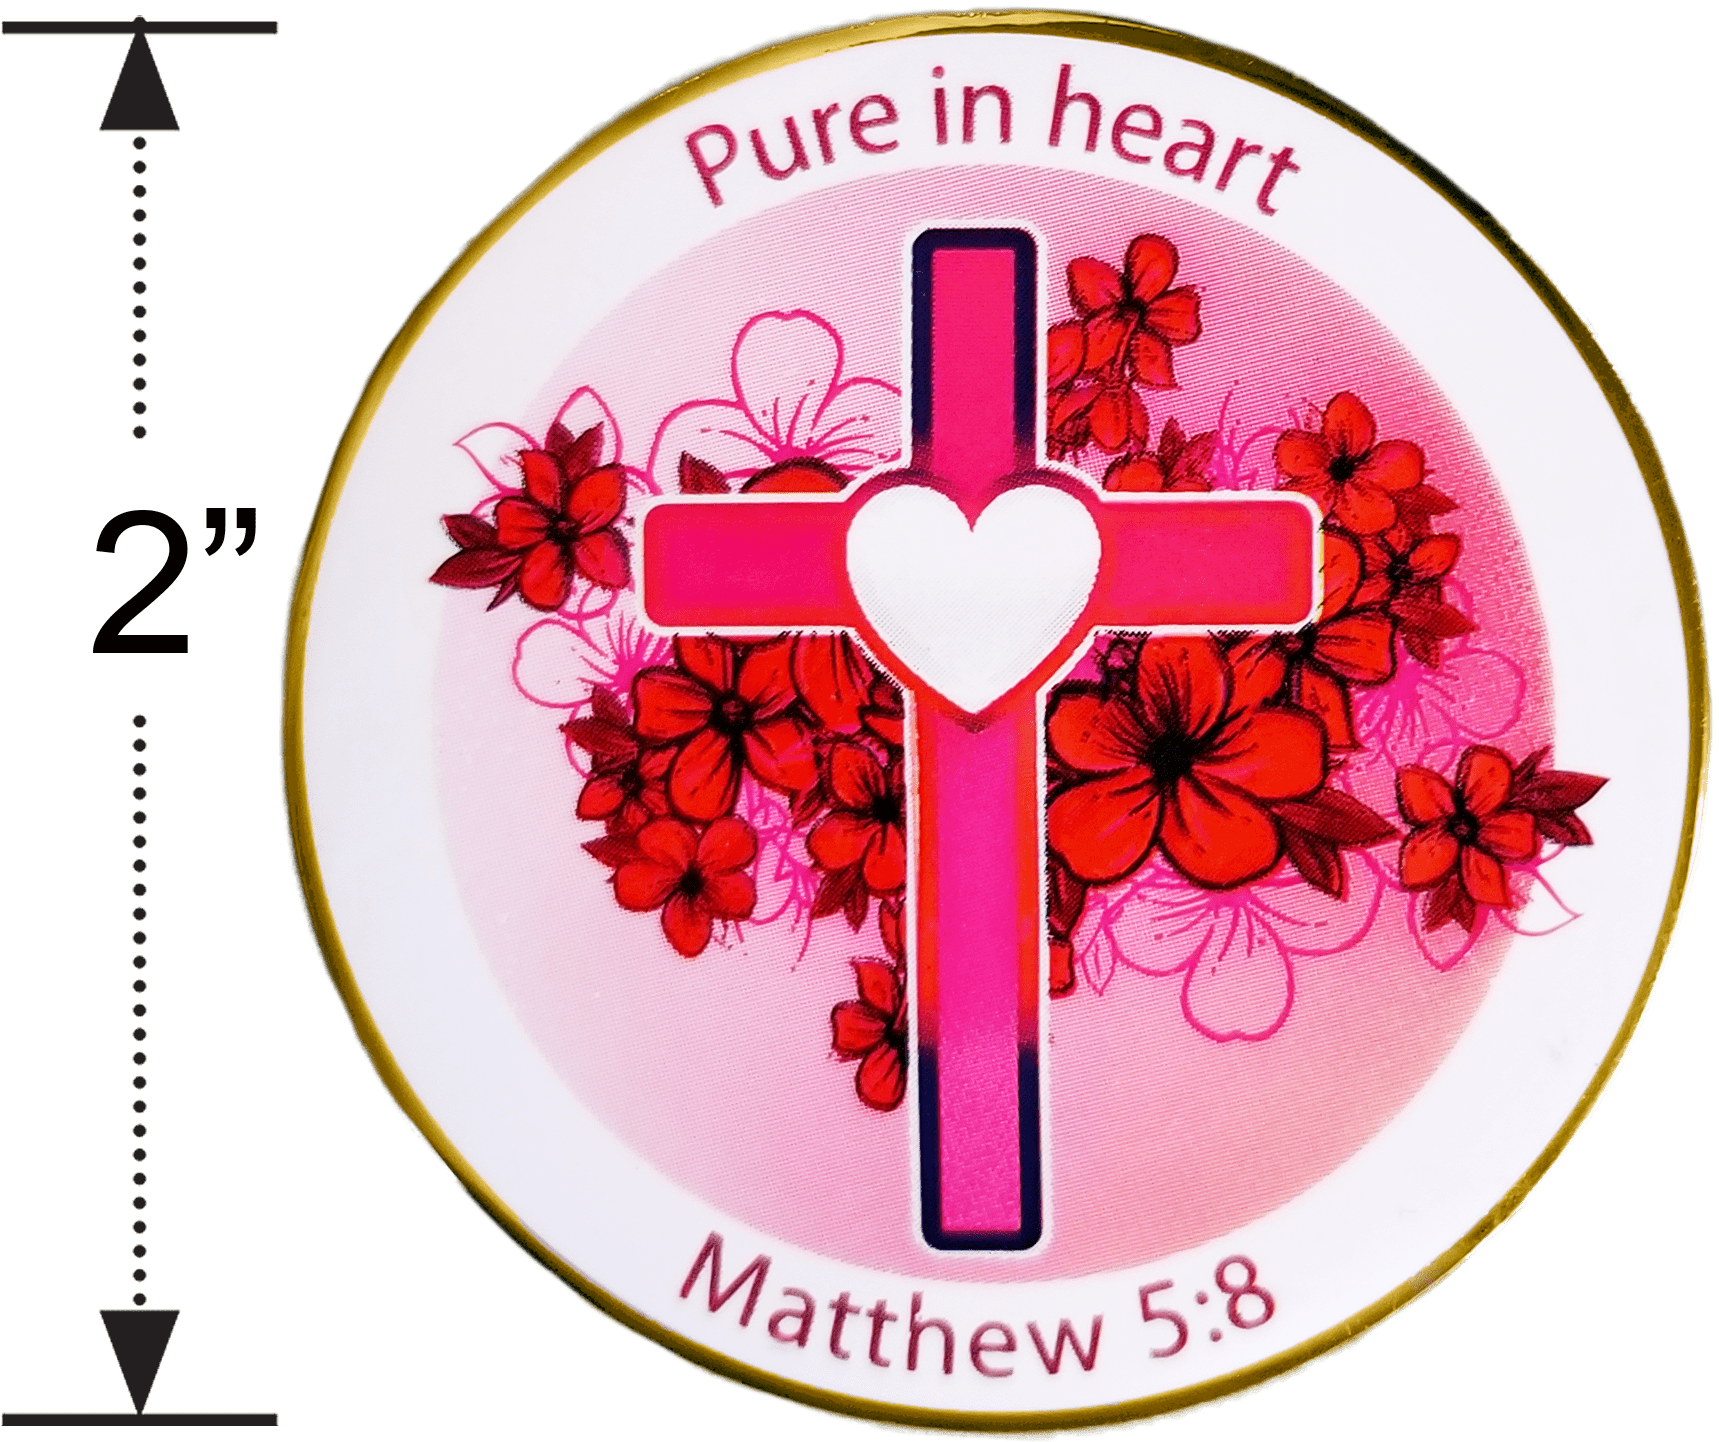 Gold Plated Christian Challenge Coin, Ladies Purity Coin, Matthew 5:8 - Logos Trading Post, Christian Gift